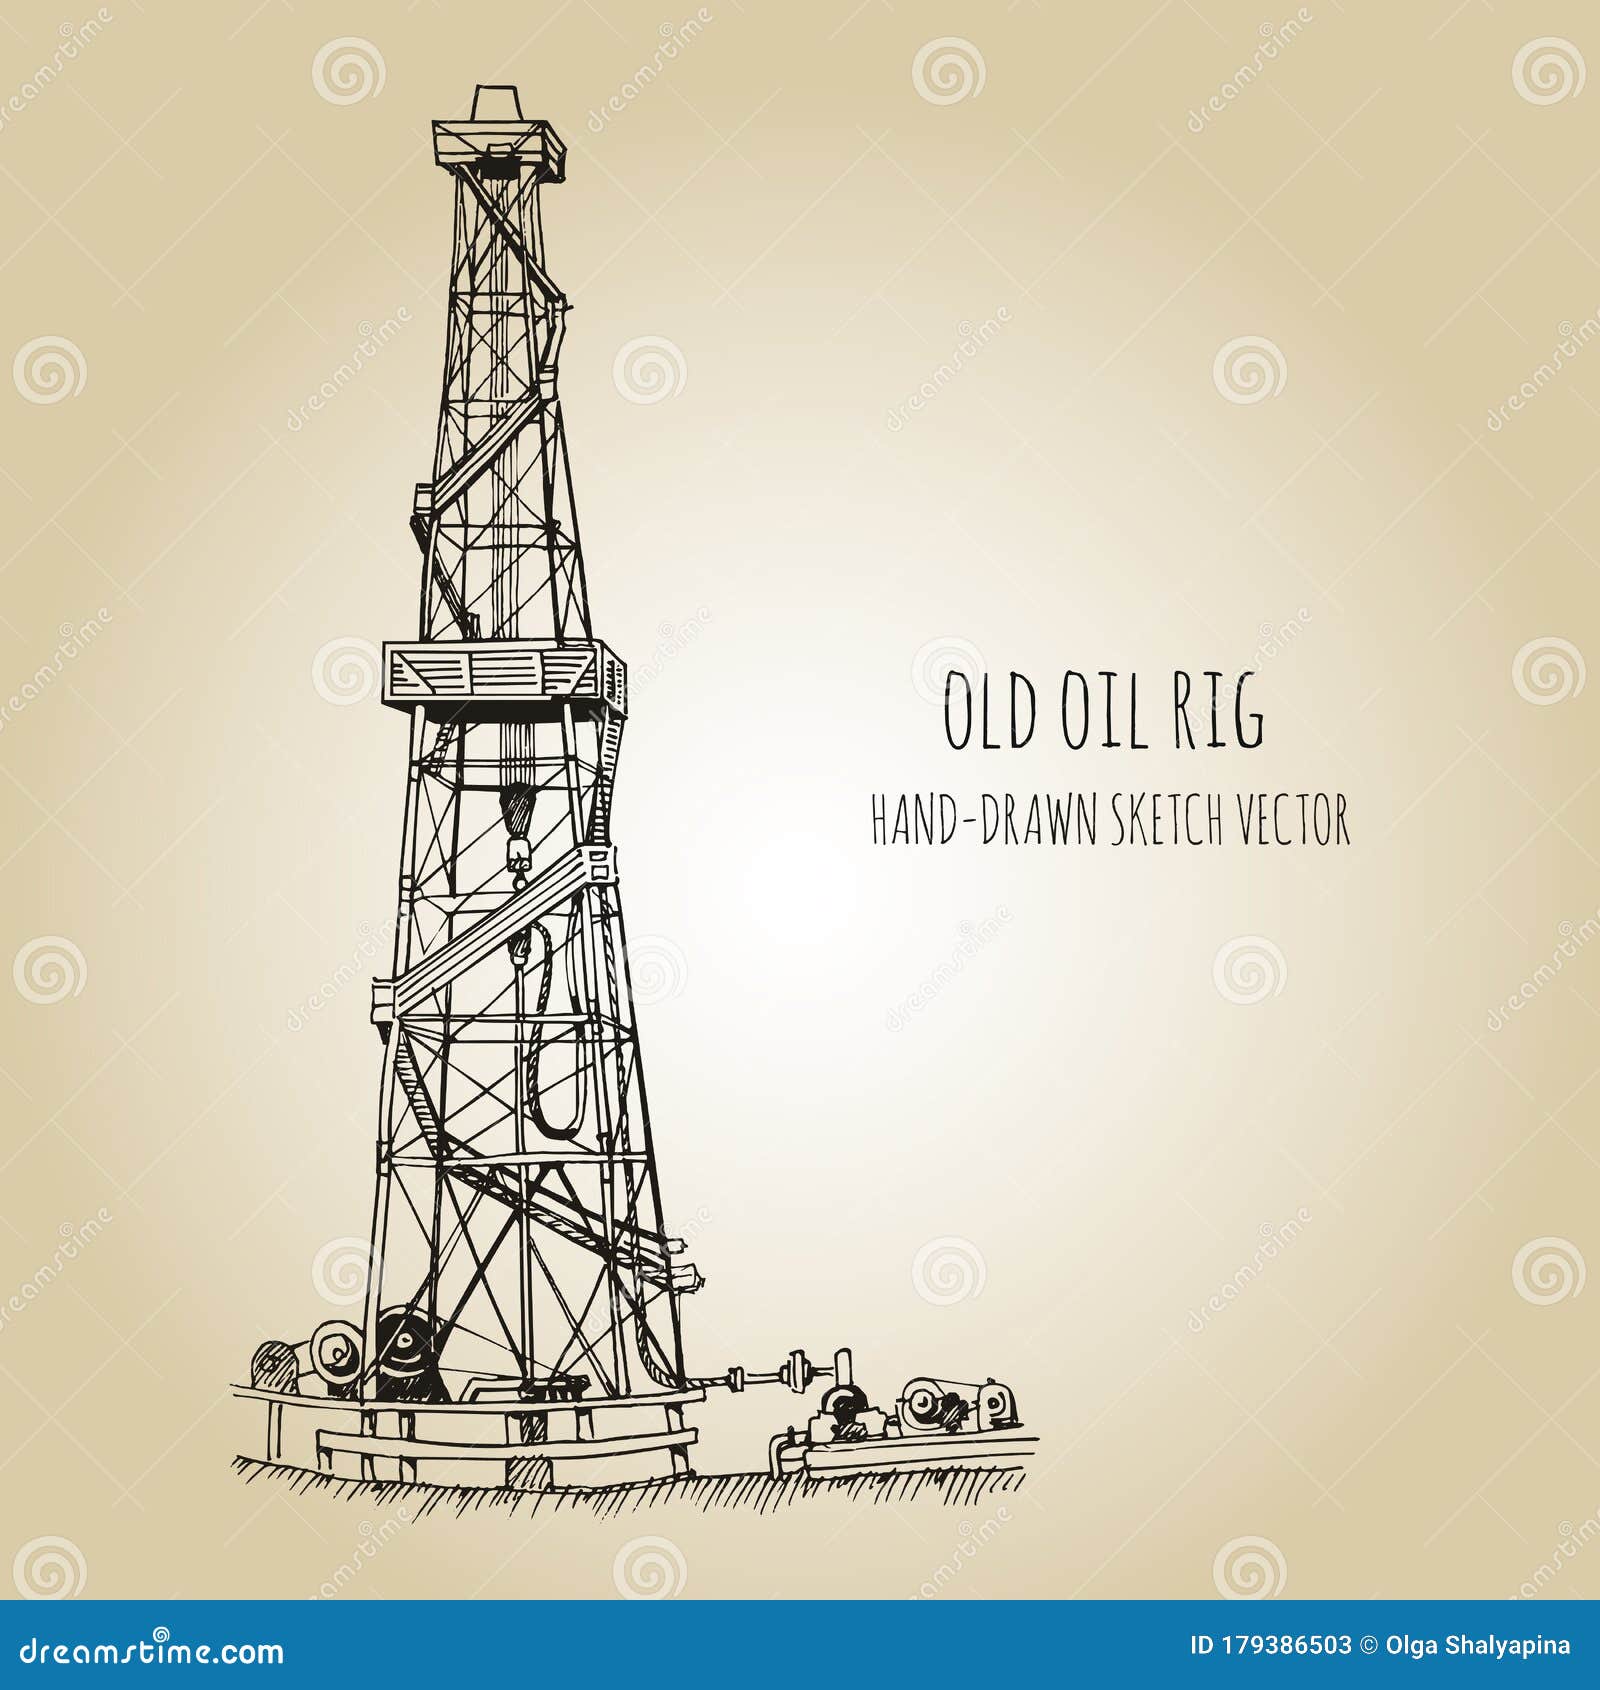 Oil Rig Gas Vectors from GraphicRiver